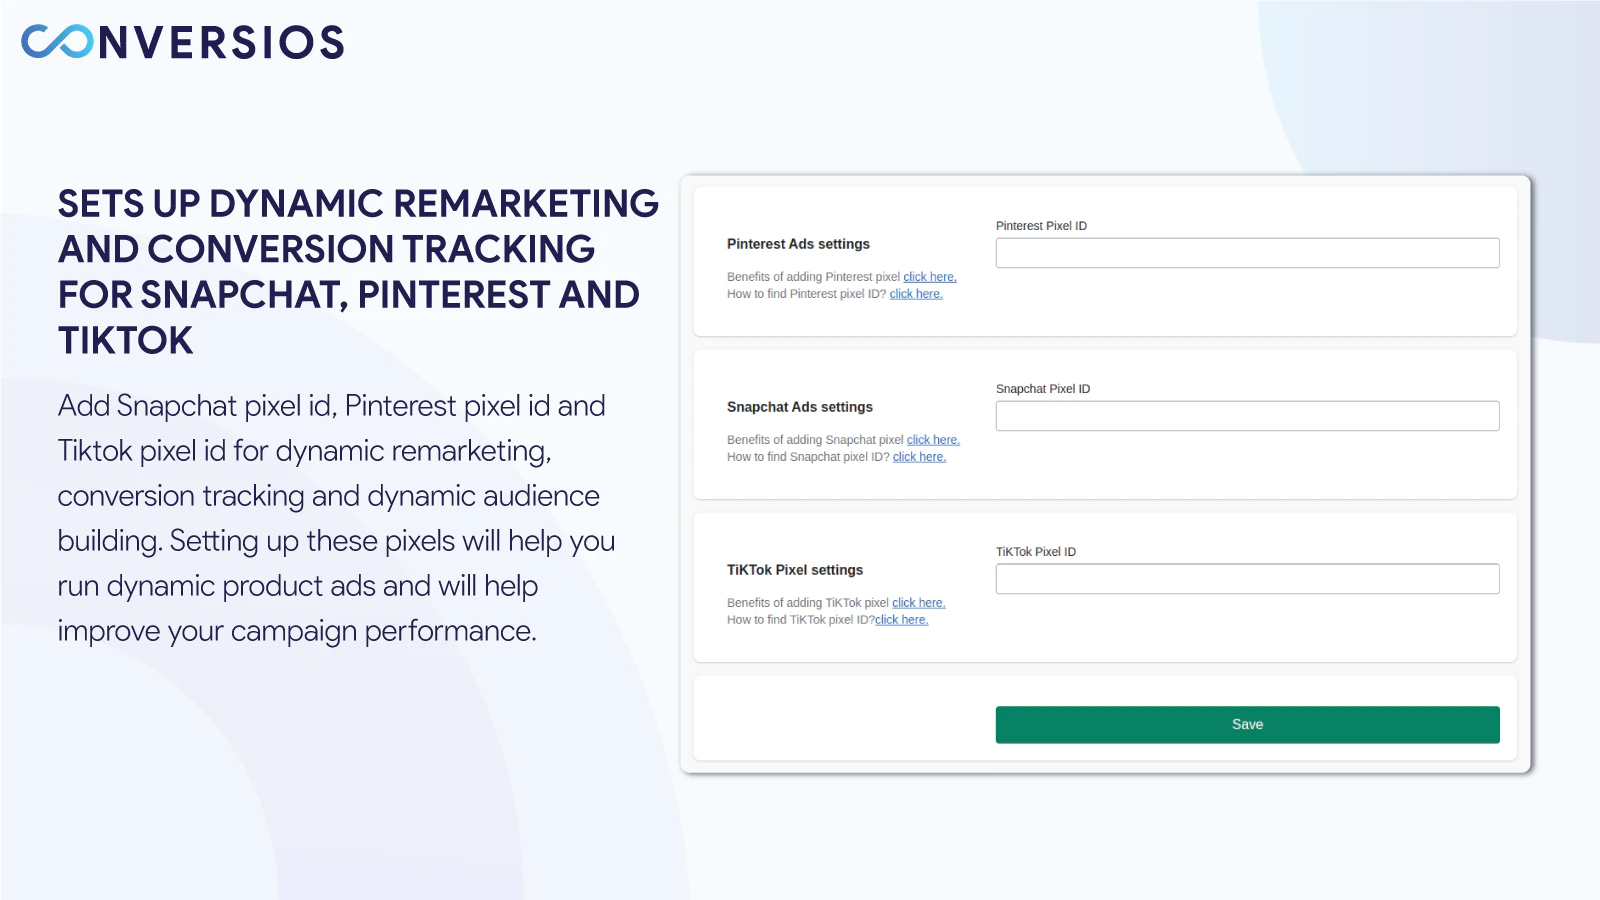 Setup Dynamic Remarketing and Conversion Tracking with Snapchat, Pinterest, and TikTok Pixel